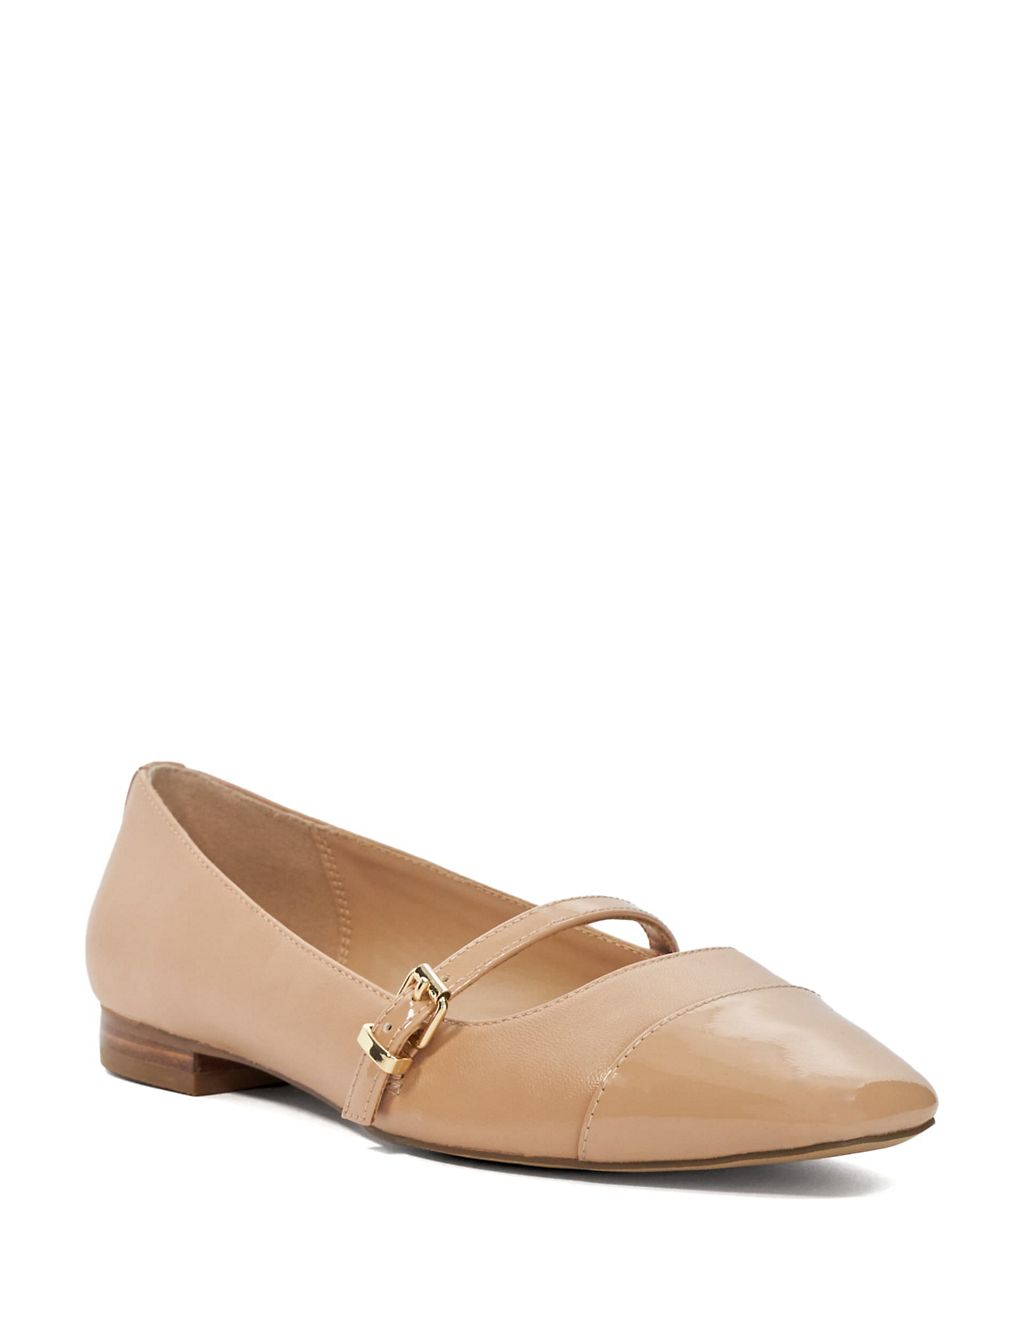 Leather Buckle Flat Ballet Pumps 1 of 5